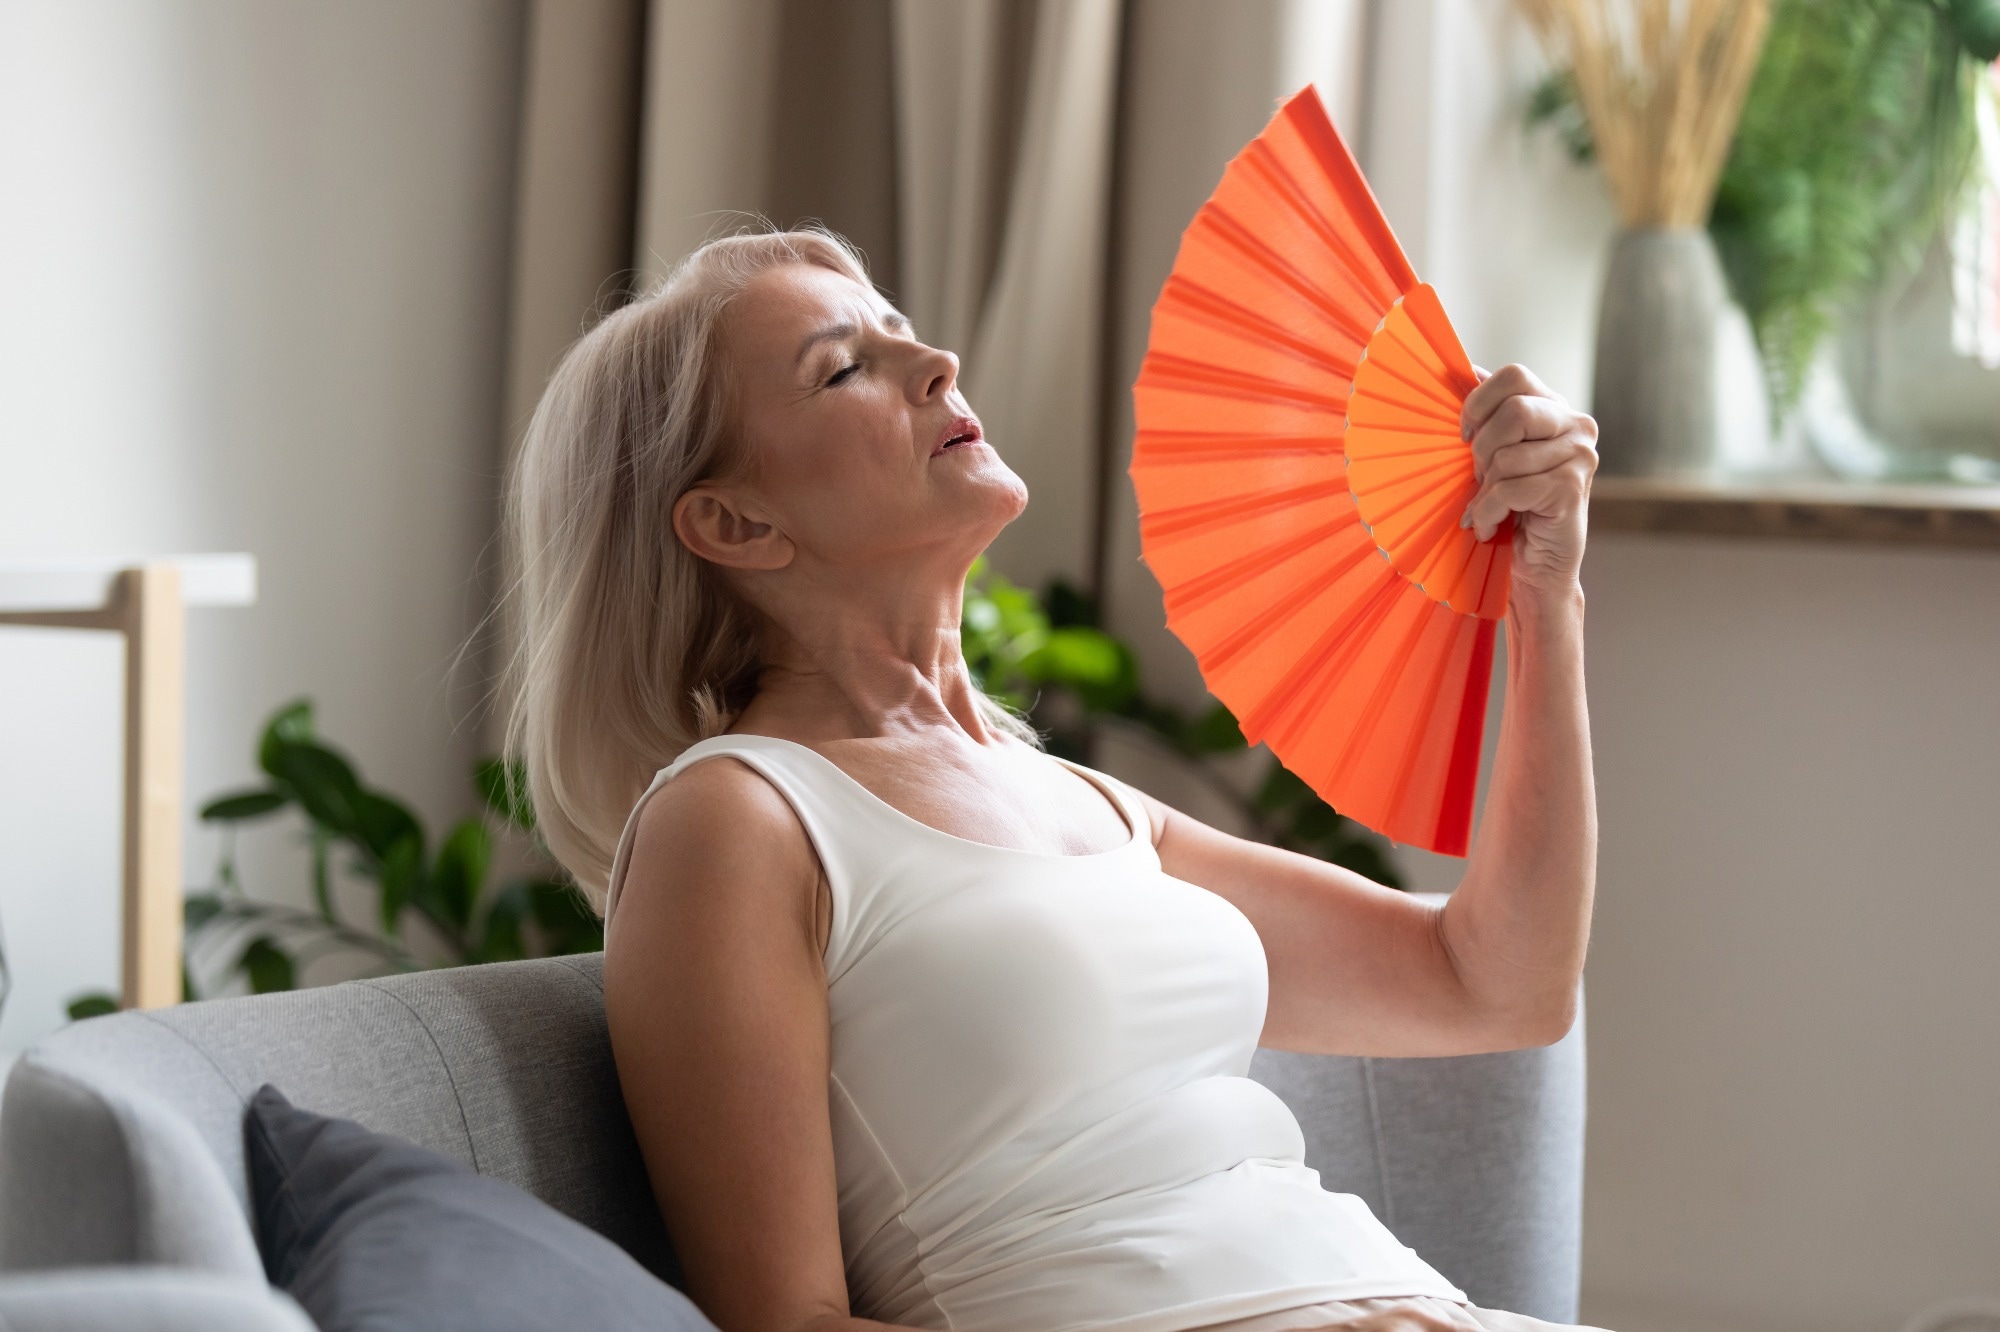 Study: Menopause Hot Flashes and Molecular Mechanisms Modulated by Food-Derived Nutrients. Image Credit: fizkes/Shutterstock.com